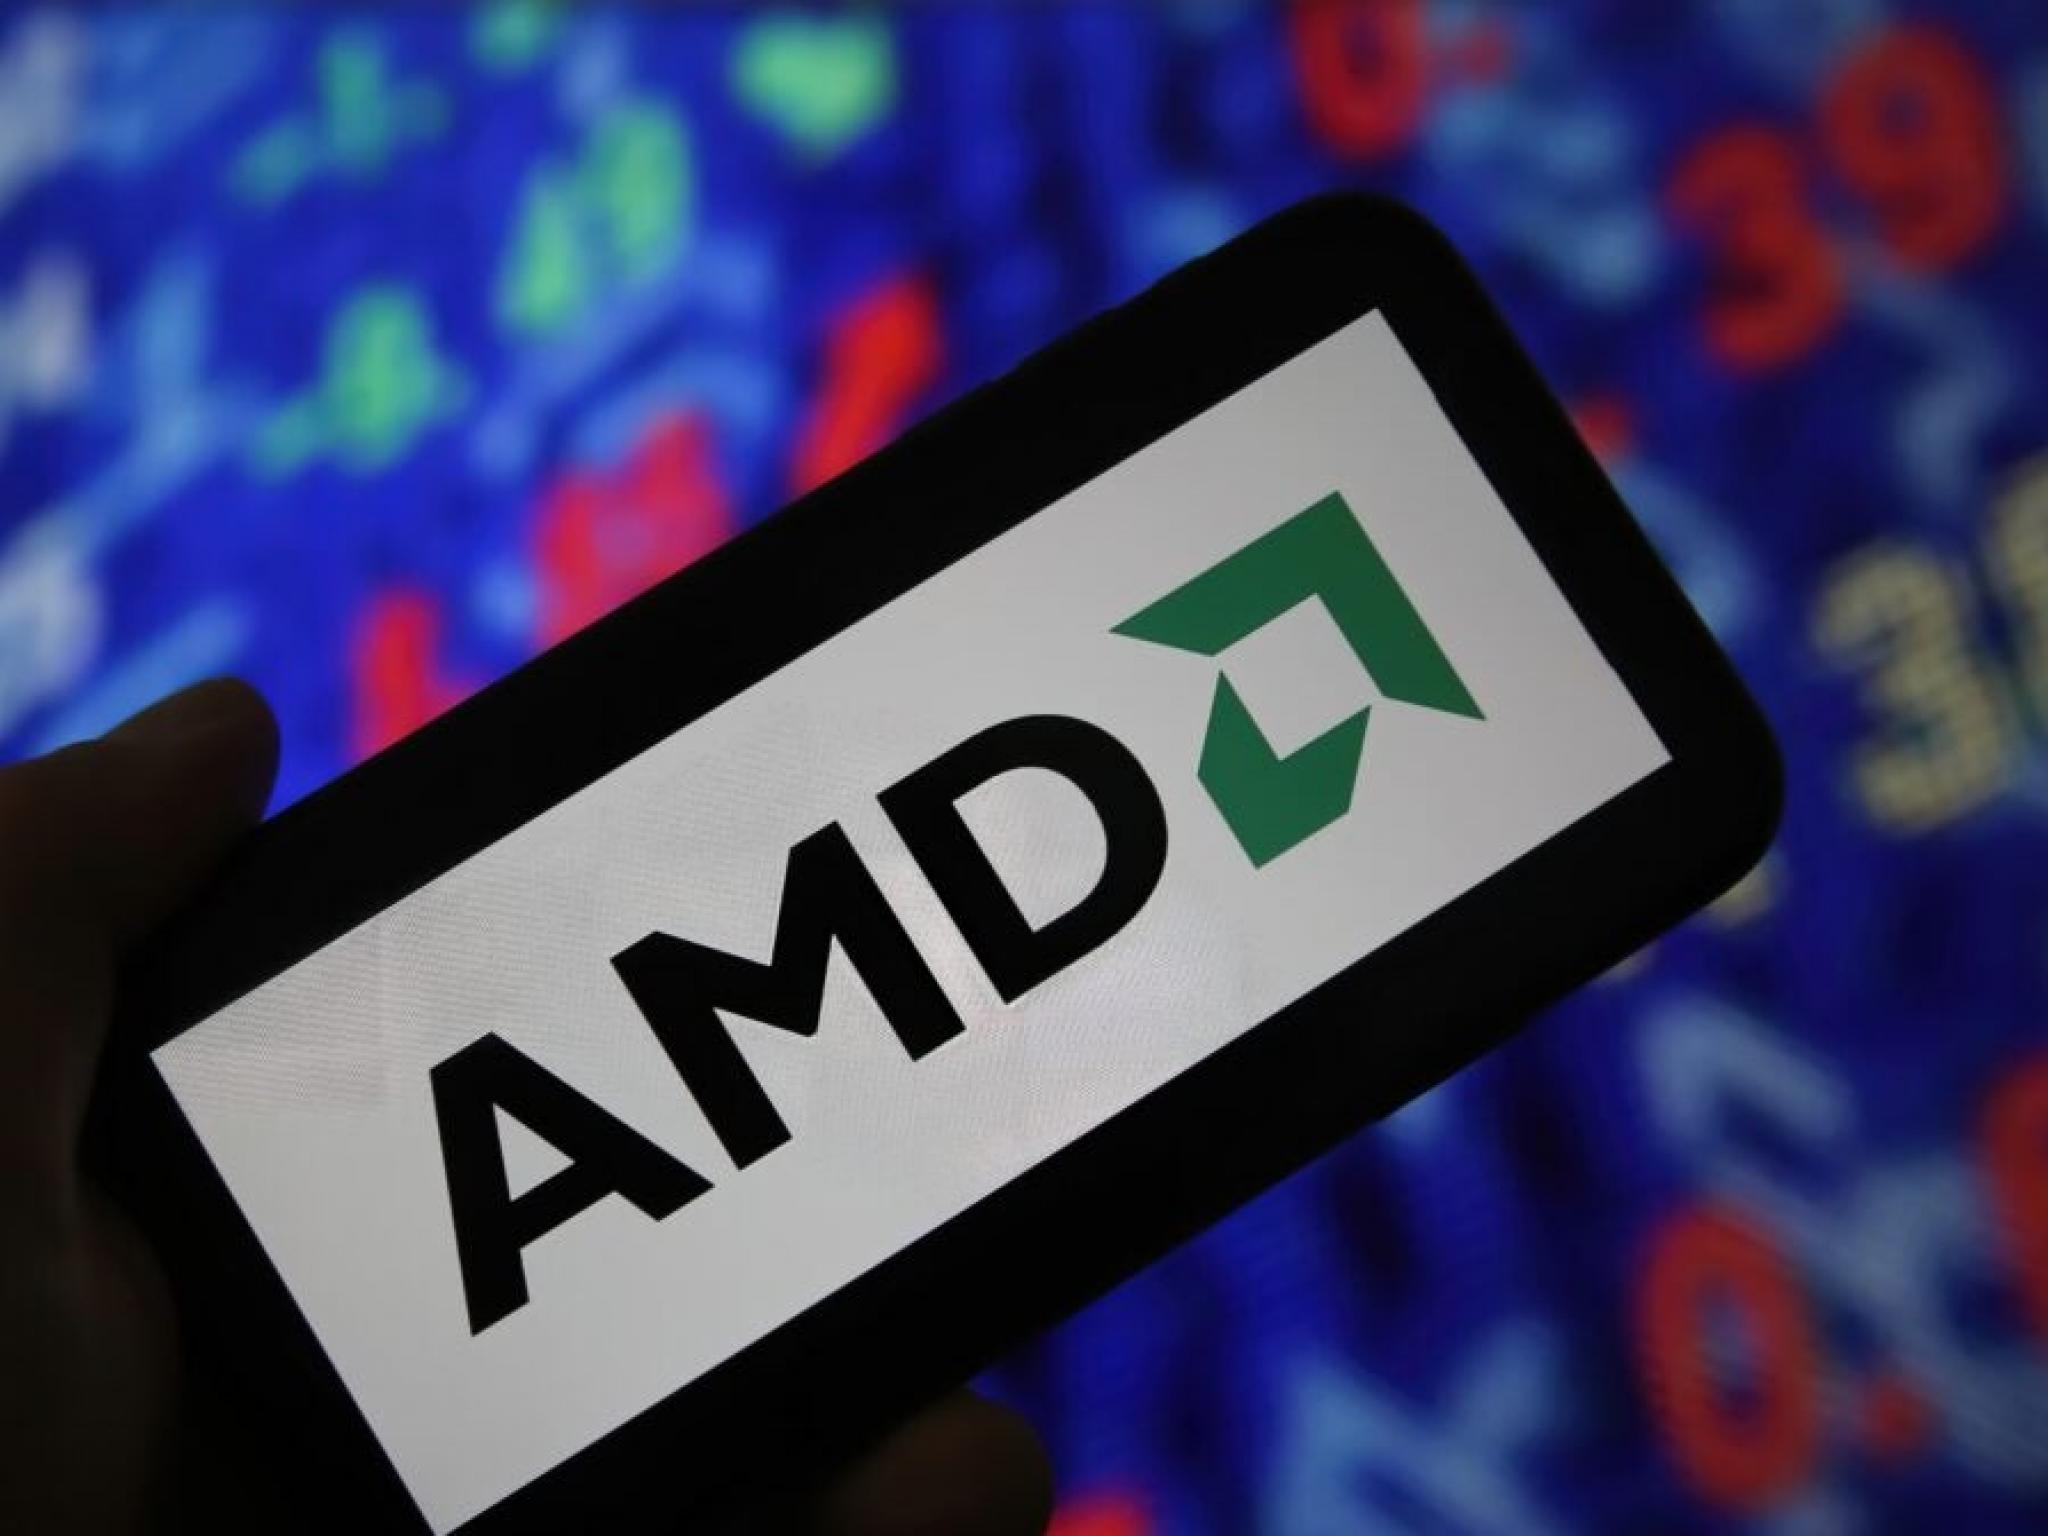  amd-cyberattack-hacker-claims-to-sell-stolen-data-company-says-working-closely-with-law-enforcement-officials-updated 